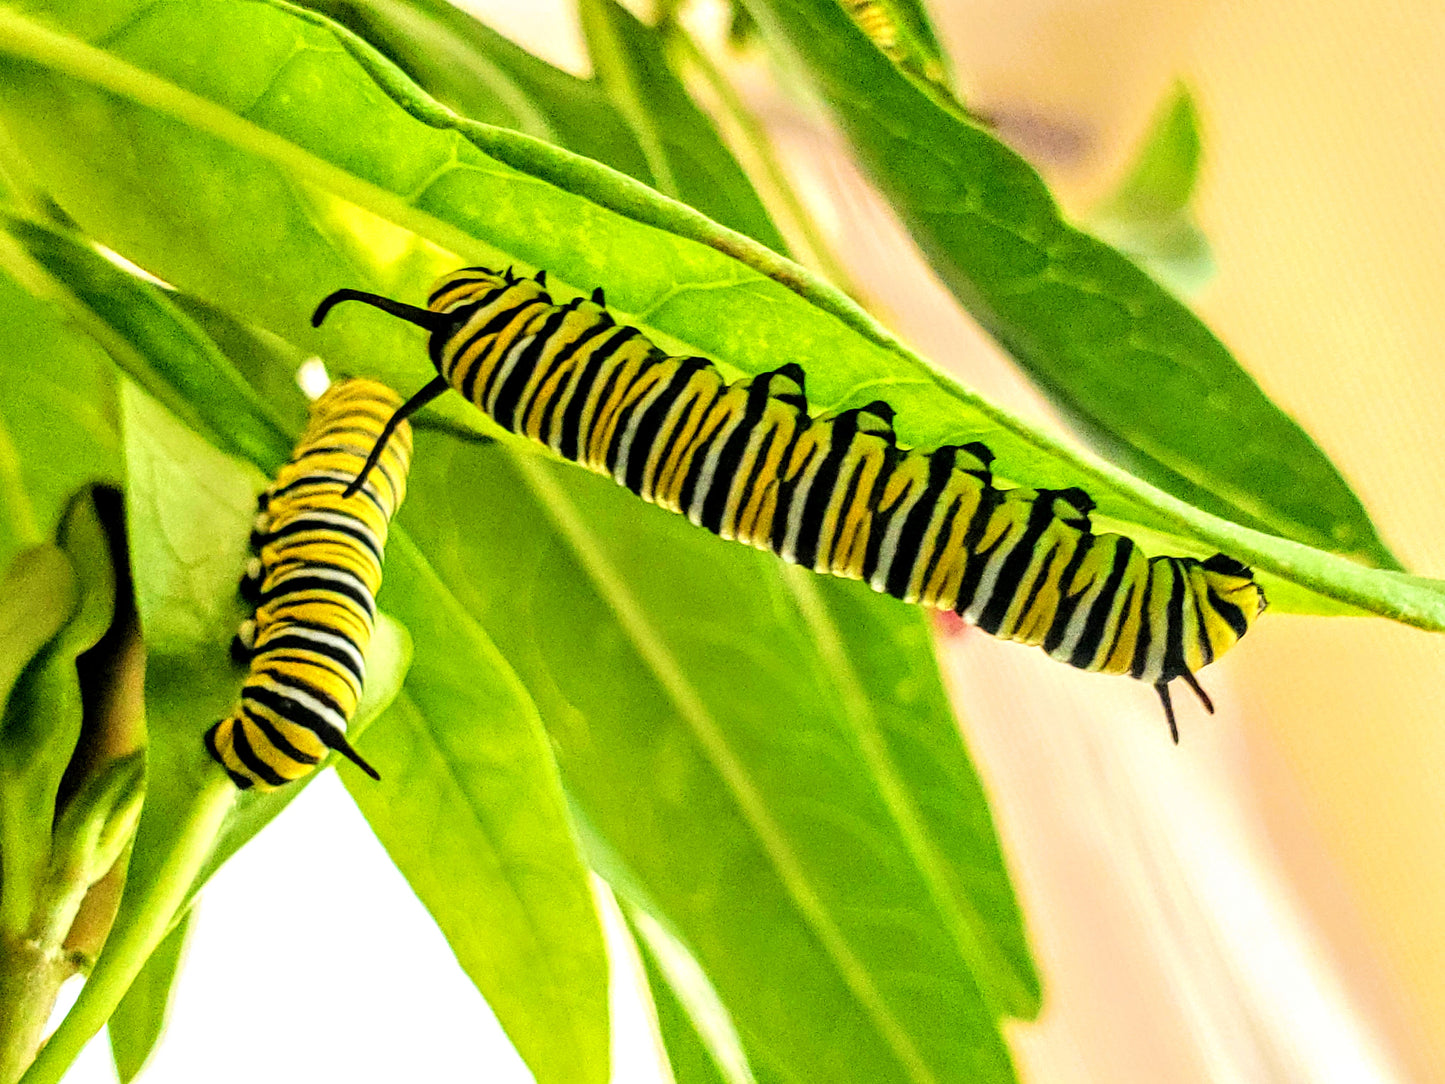 Monarch Butterfly Kit with Milkweed plant